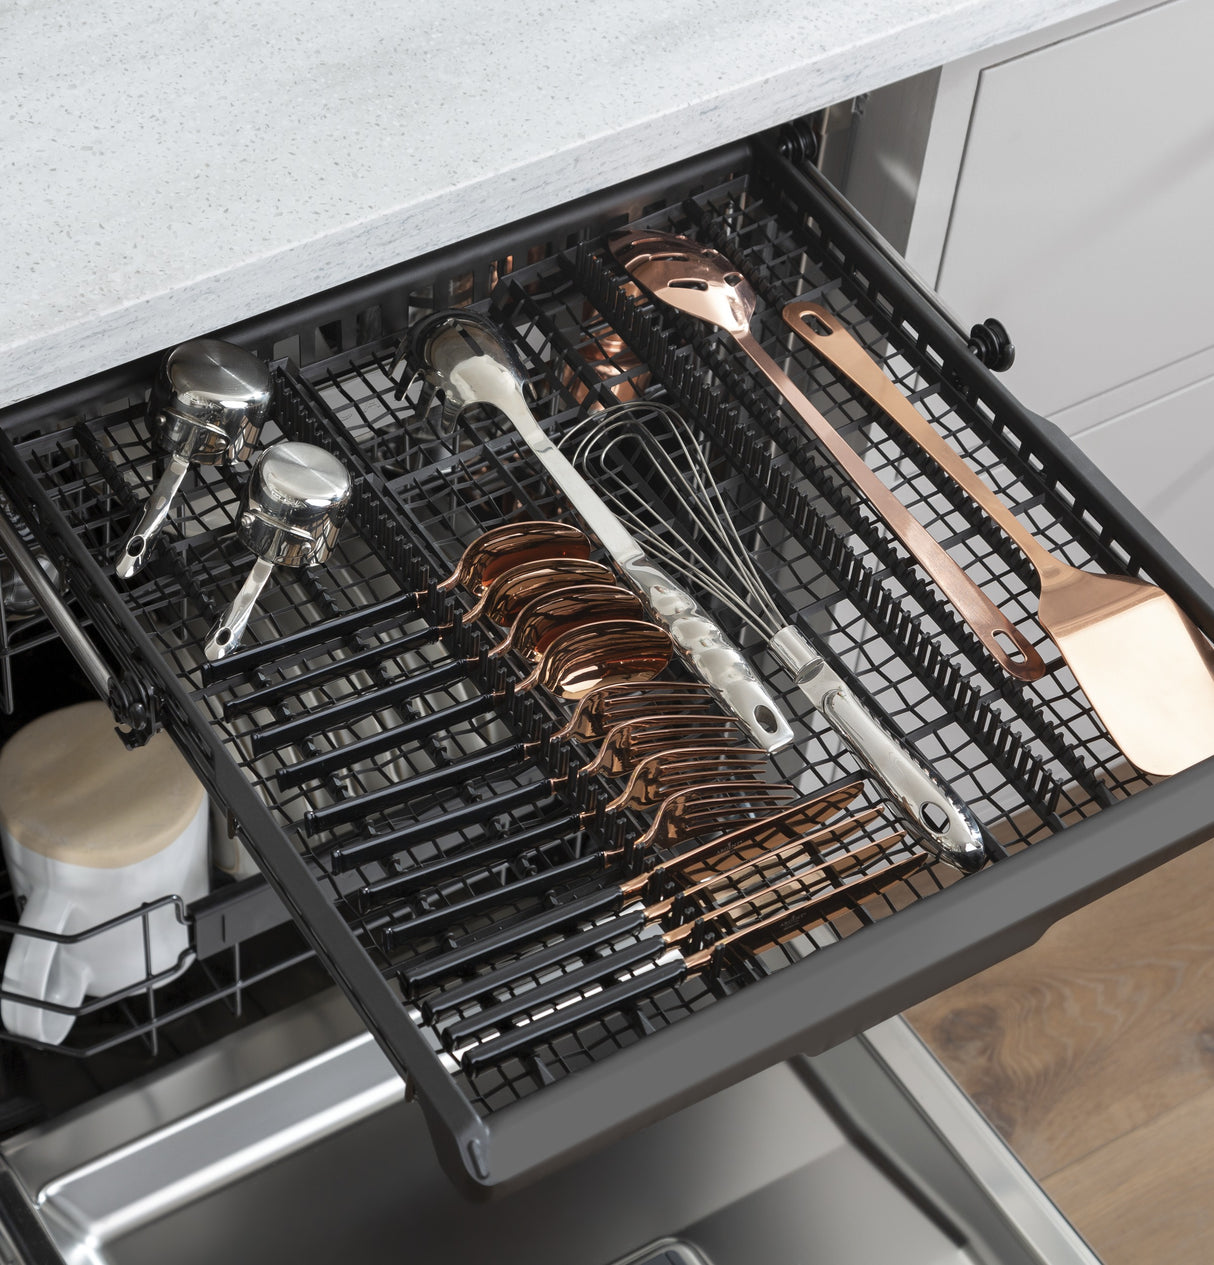 Caf(eback)(TM) ENERGY STAR(R) Stainless Steel Interior Dishwasher with Sanitize and Ultra Wash & Dry - (CDT845P4NW2)